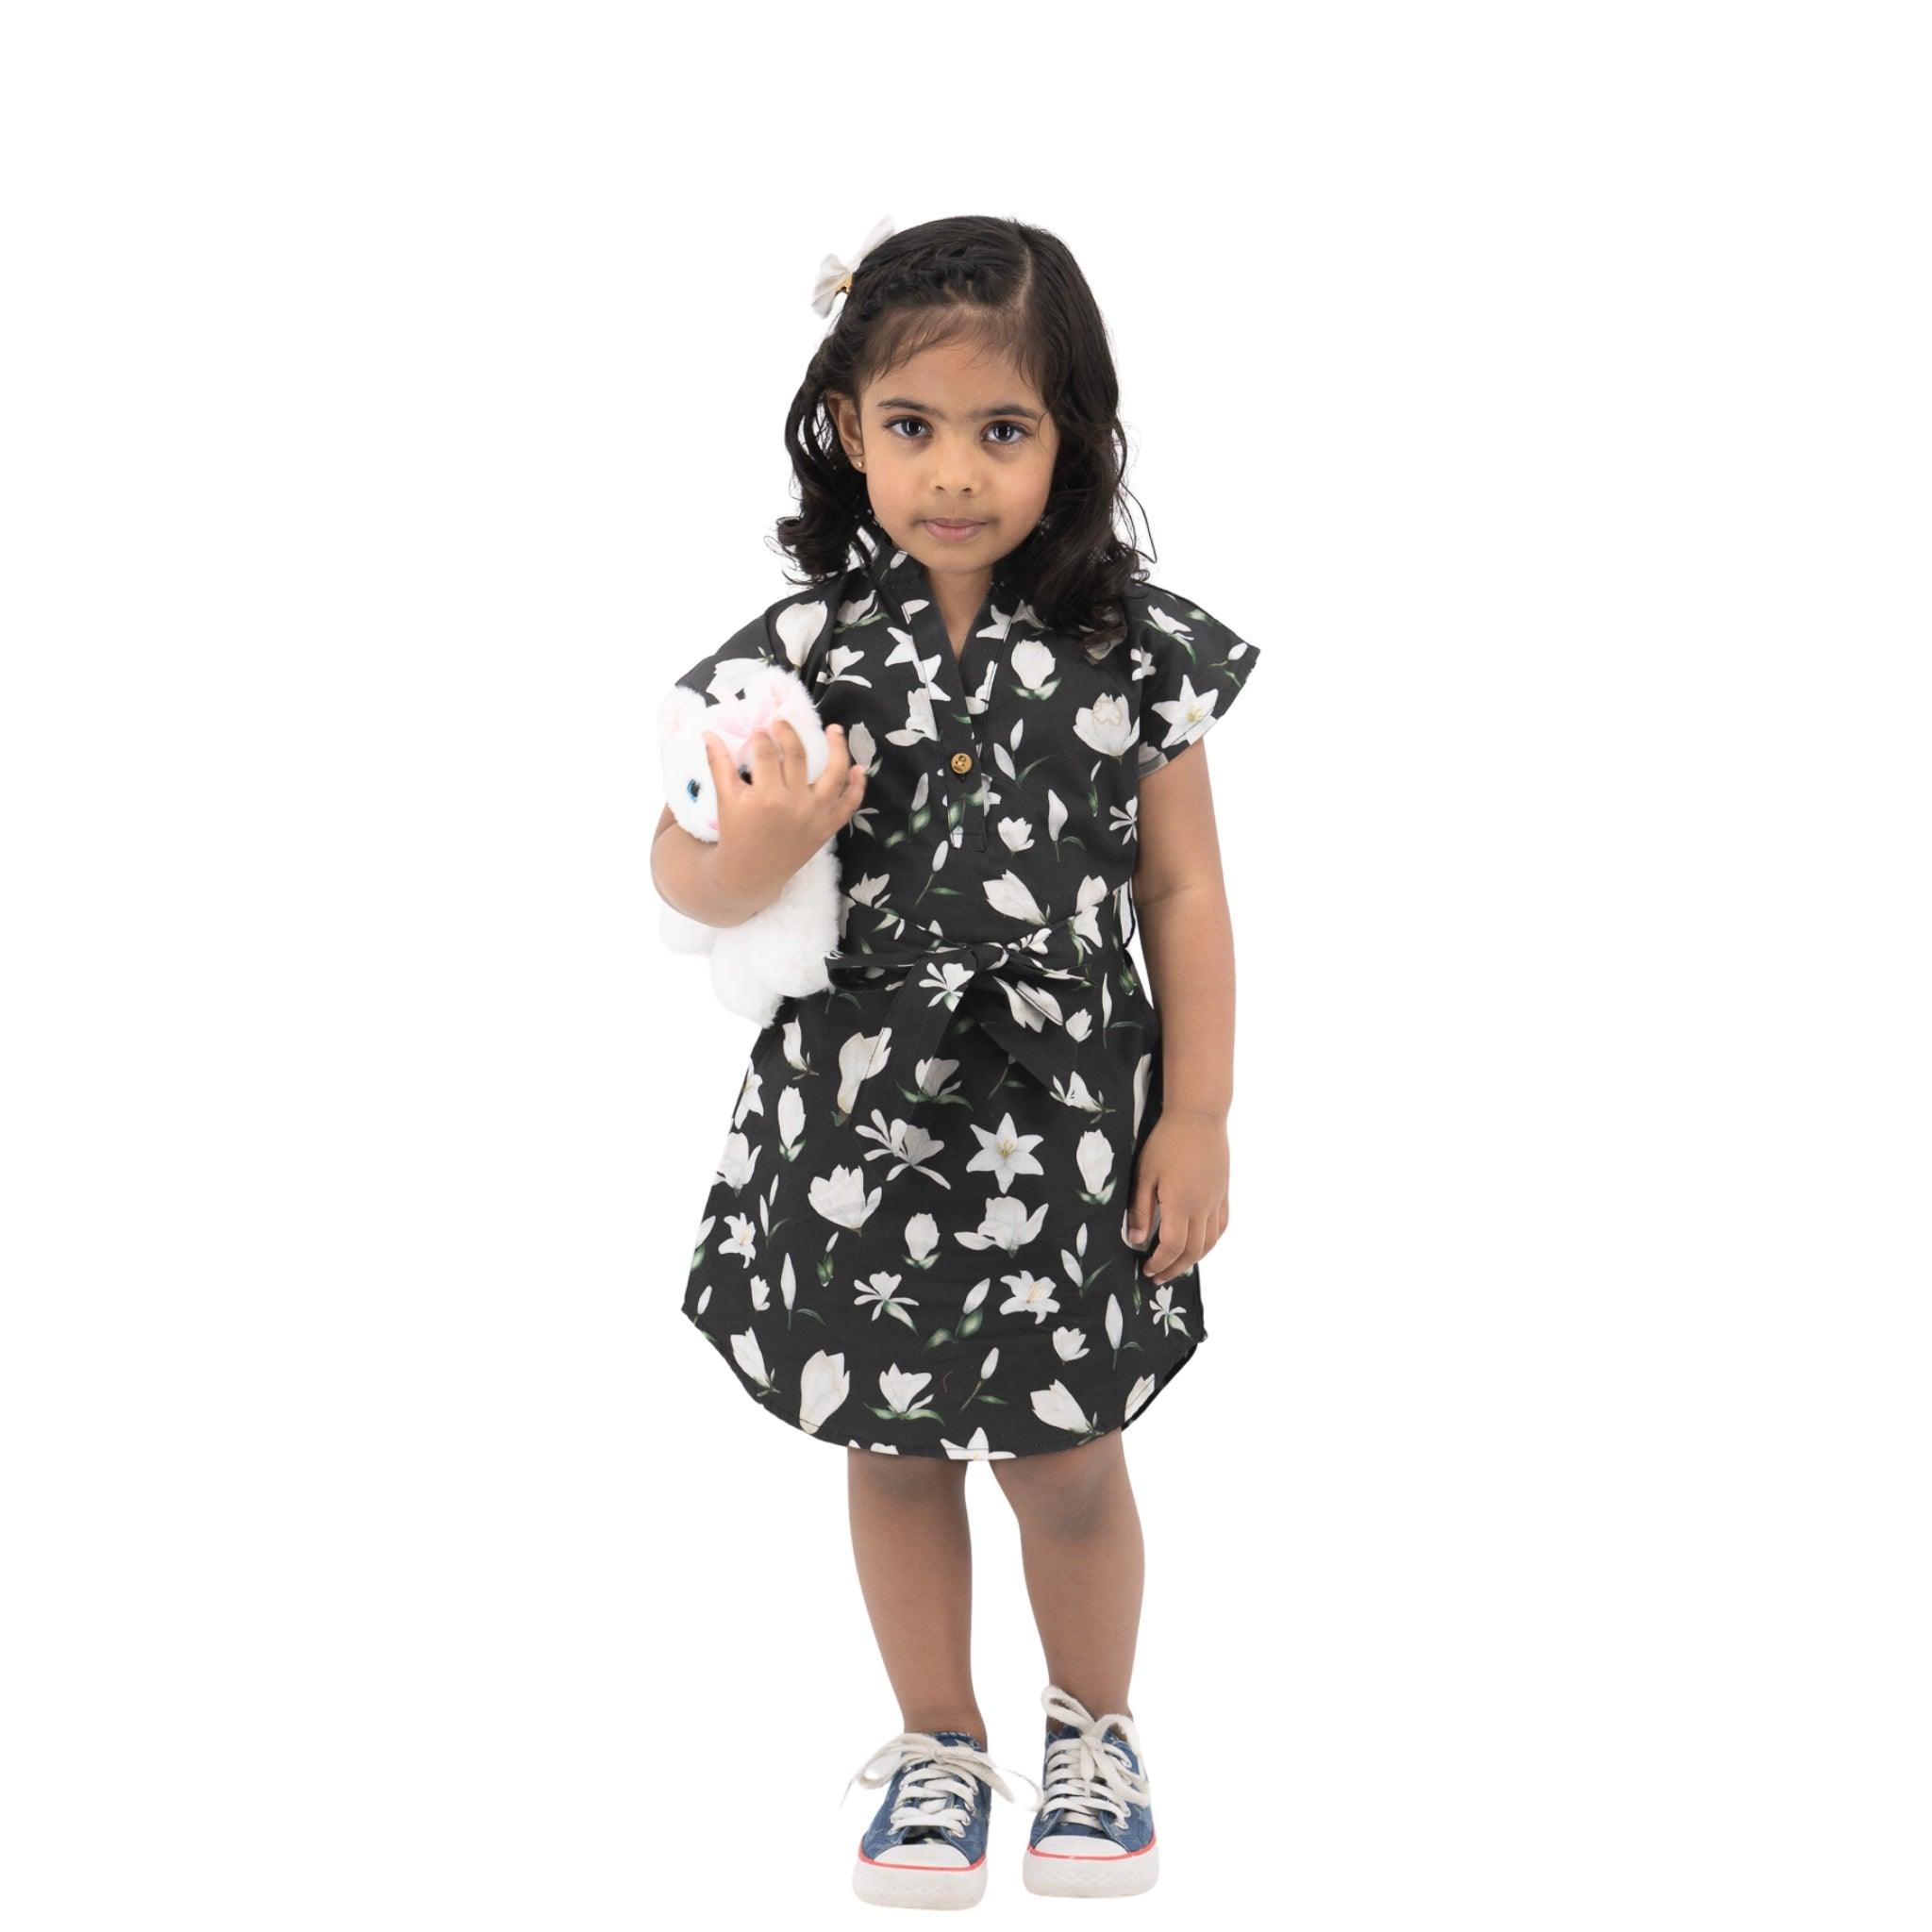 Young girl in a Karee Black Lilly Blossom Cotton Shirt Dress holding a stuffed animal, standing against a white background.